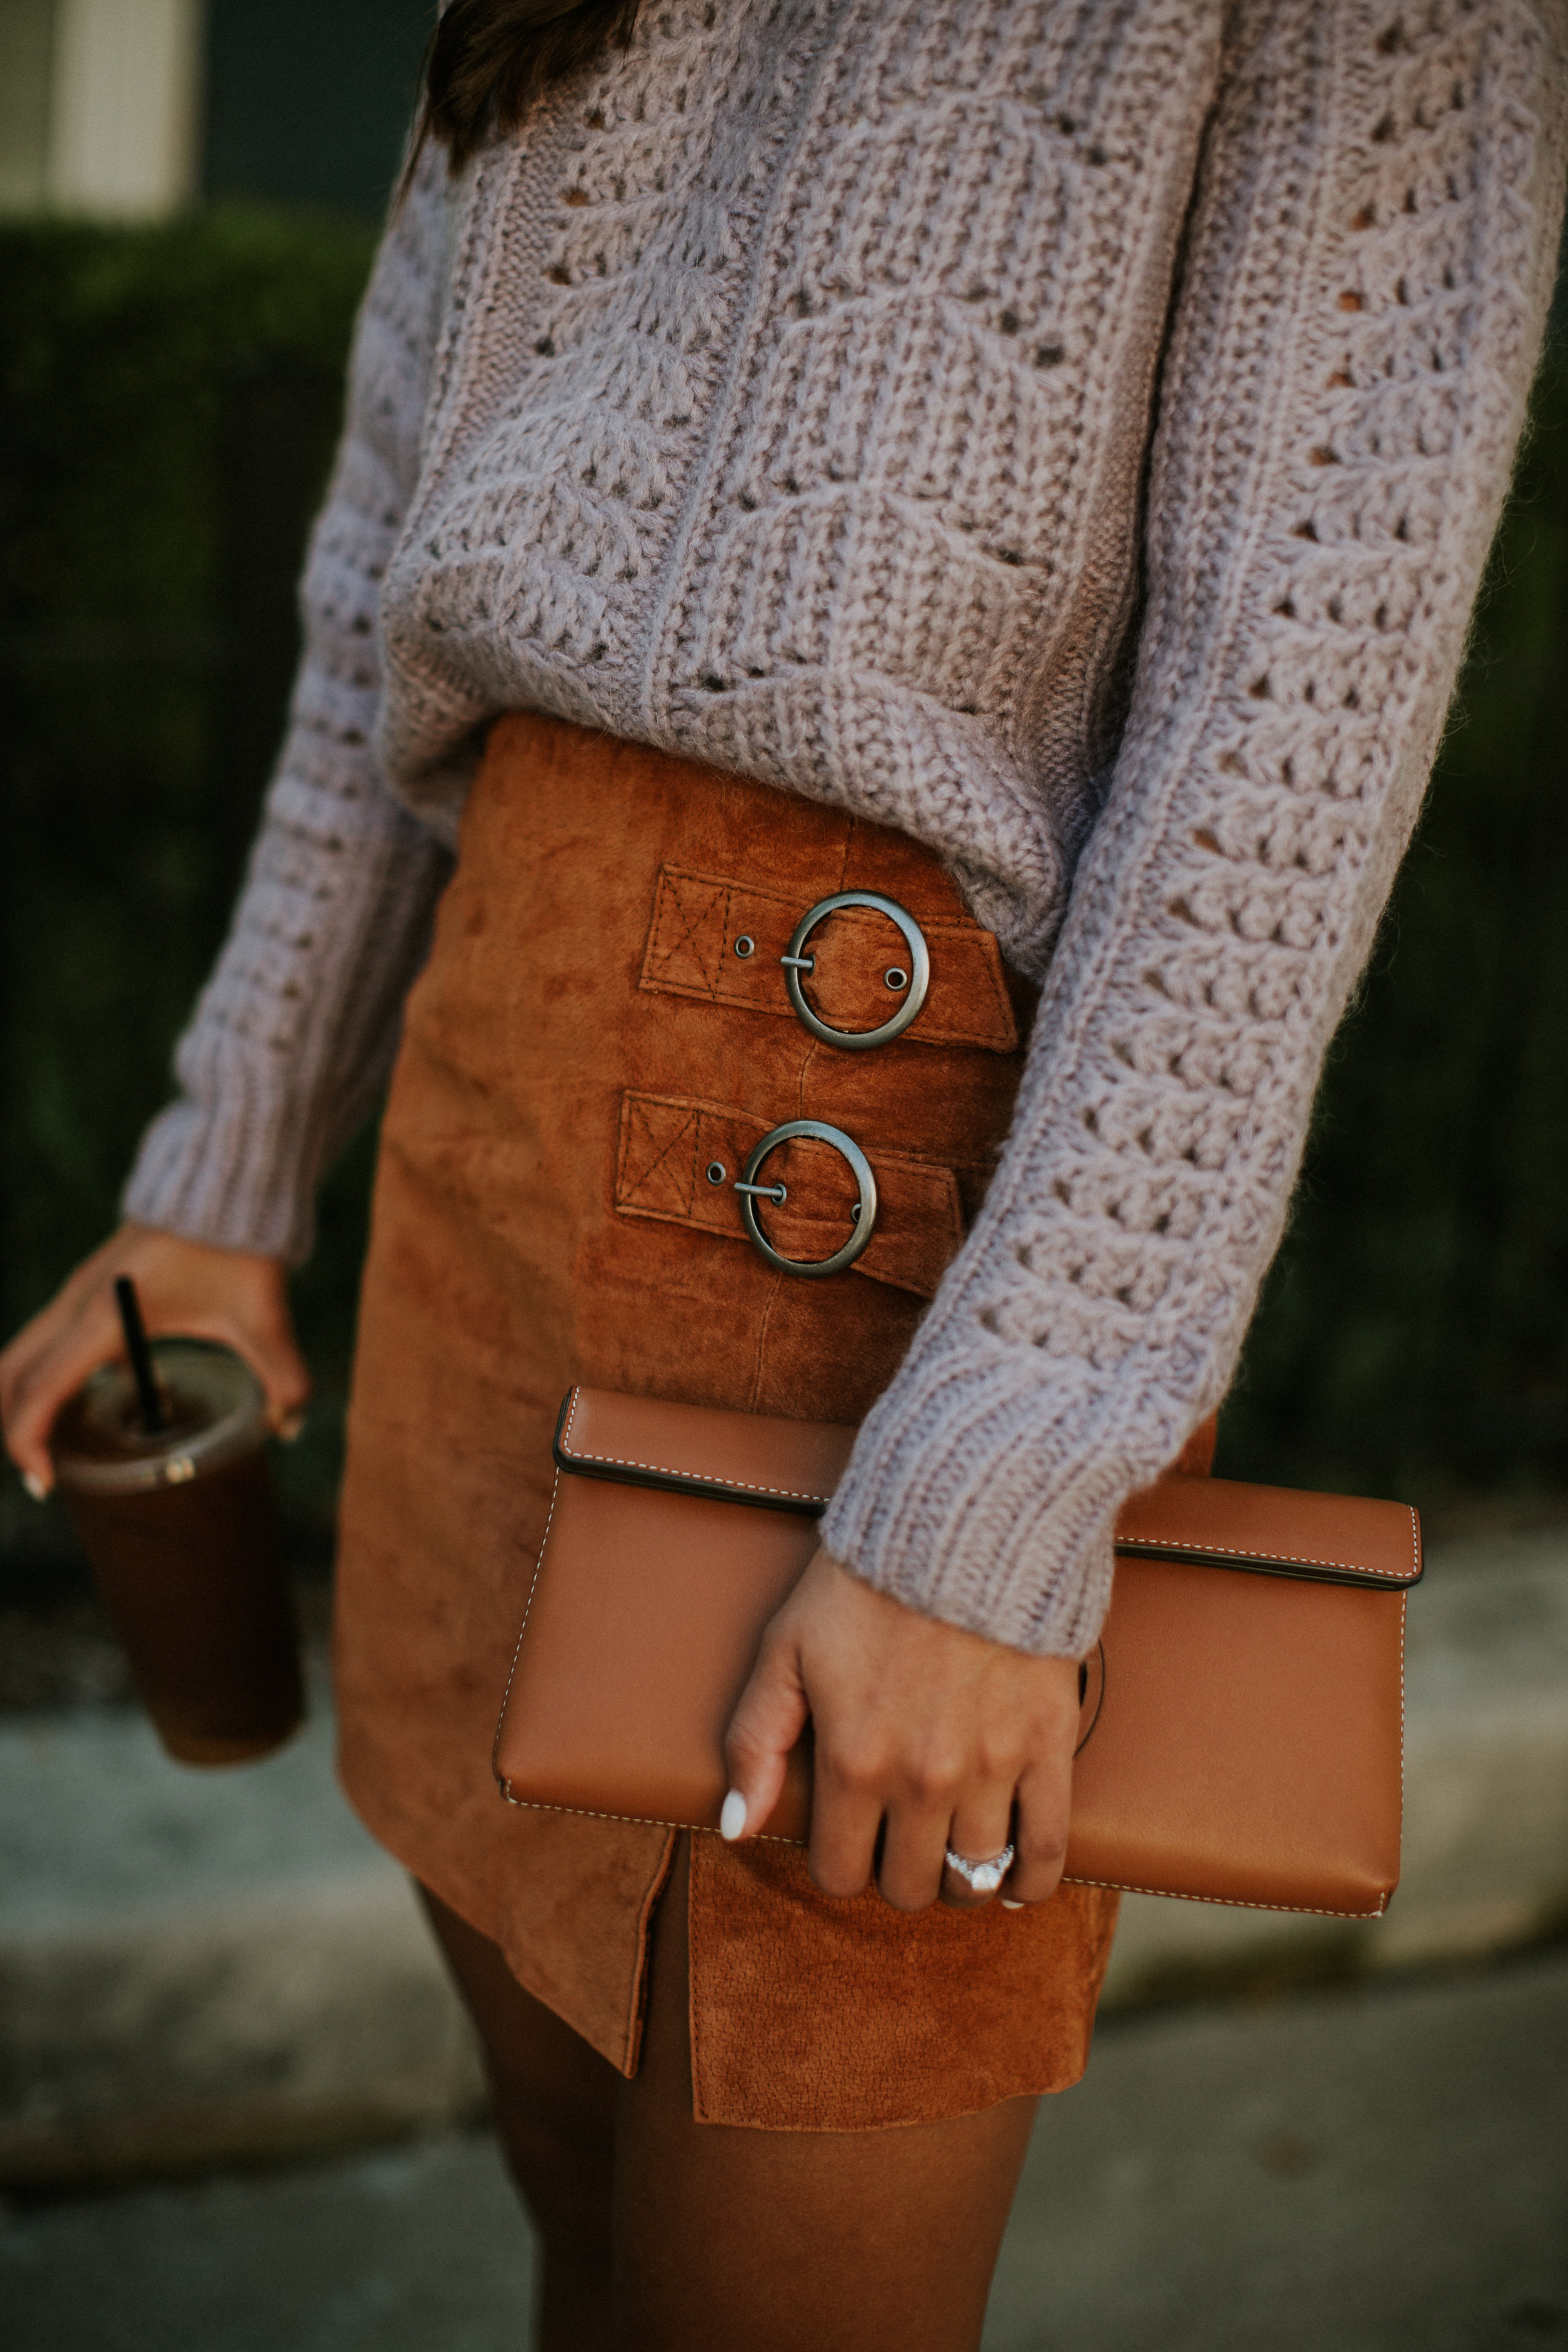 fall suede skirt, lavender sweater, lavender pullover, cognac clutch, buckle skirt, fall style, fall fashion, fall inspo, fall outfit, fall style, nordstrom outfit, nordstrom style, sock booties, steve madden sock booties, fall fashion style // grace wainwright grace white a southern drawl